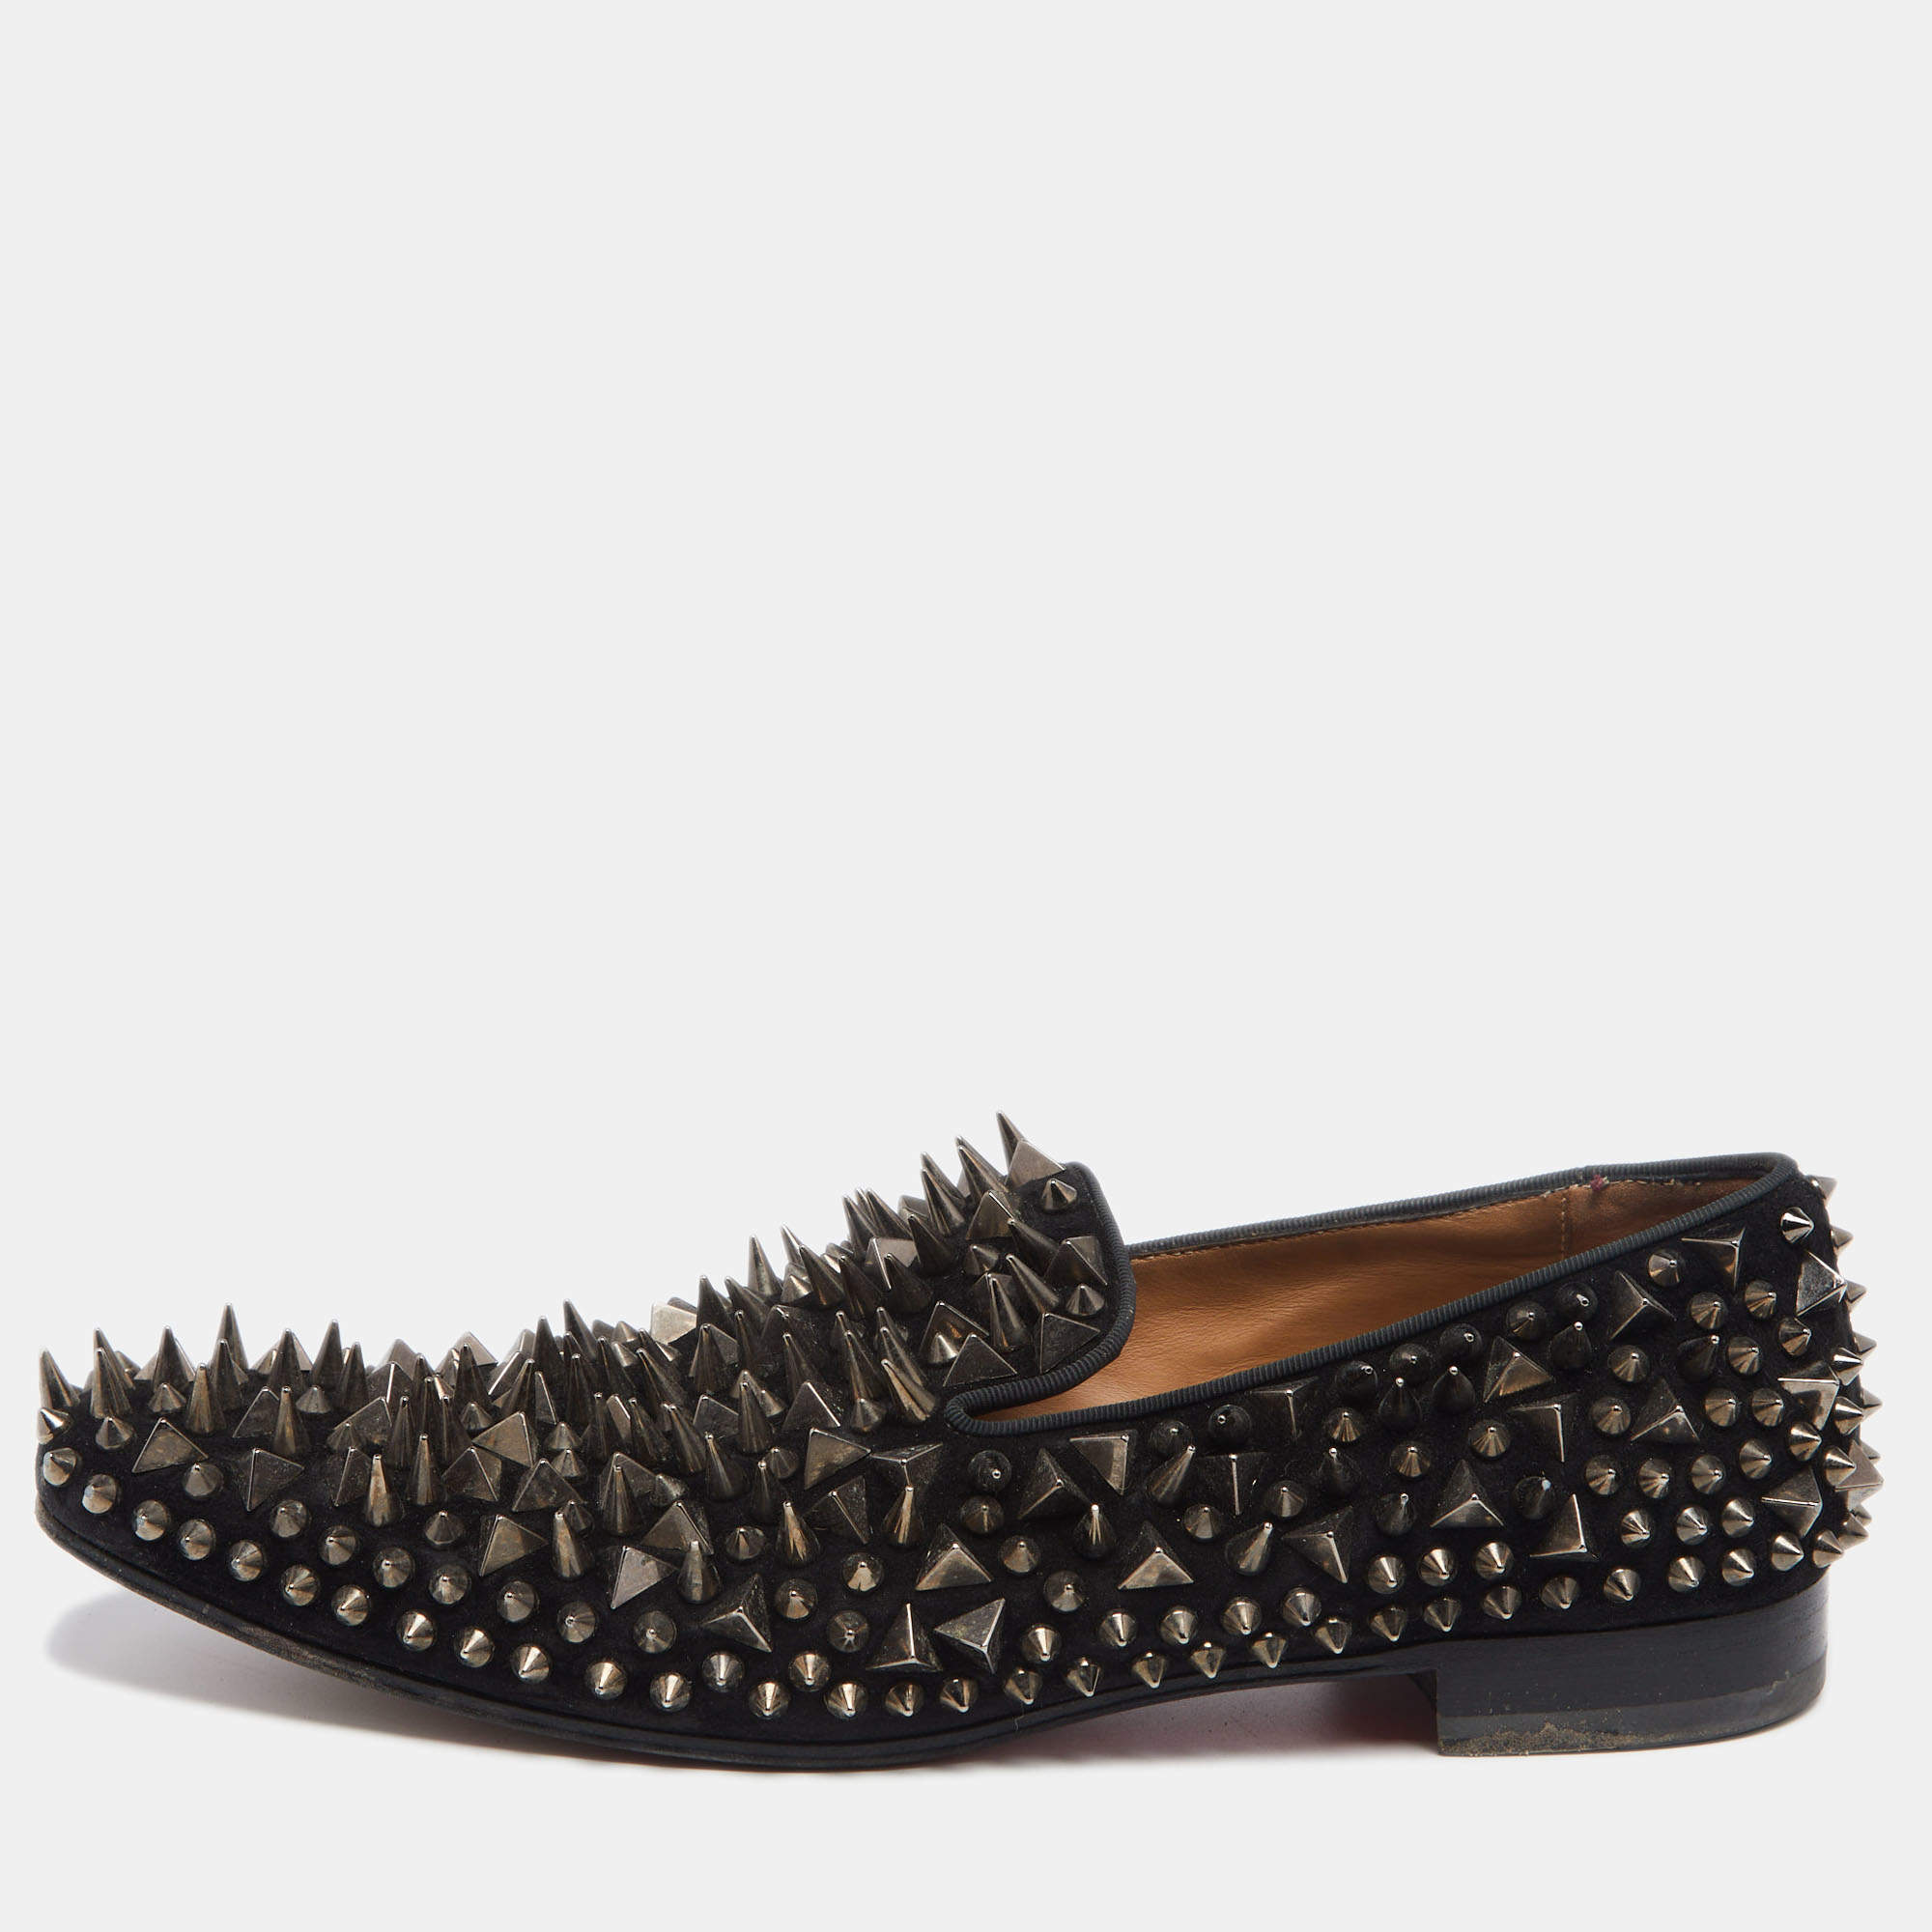 CHRISTIAN LOUBOUTIN Black Rolling Spikes Leather Loafers Size 6/36 $1295  Retail